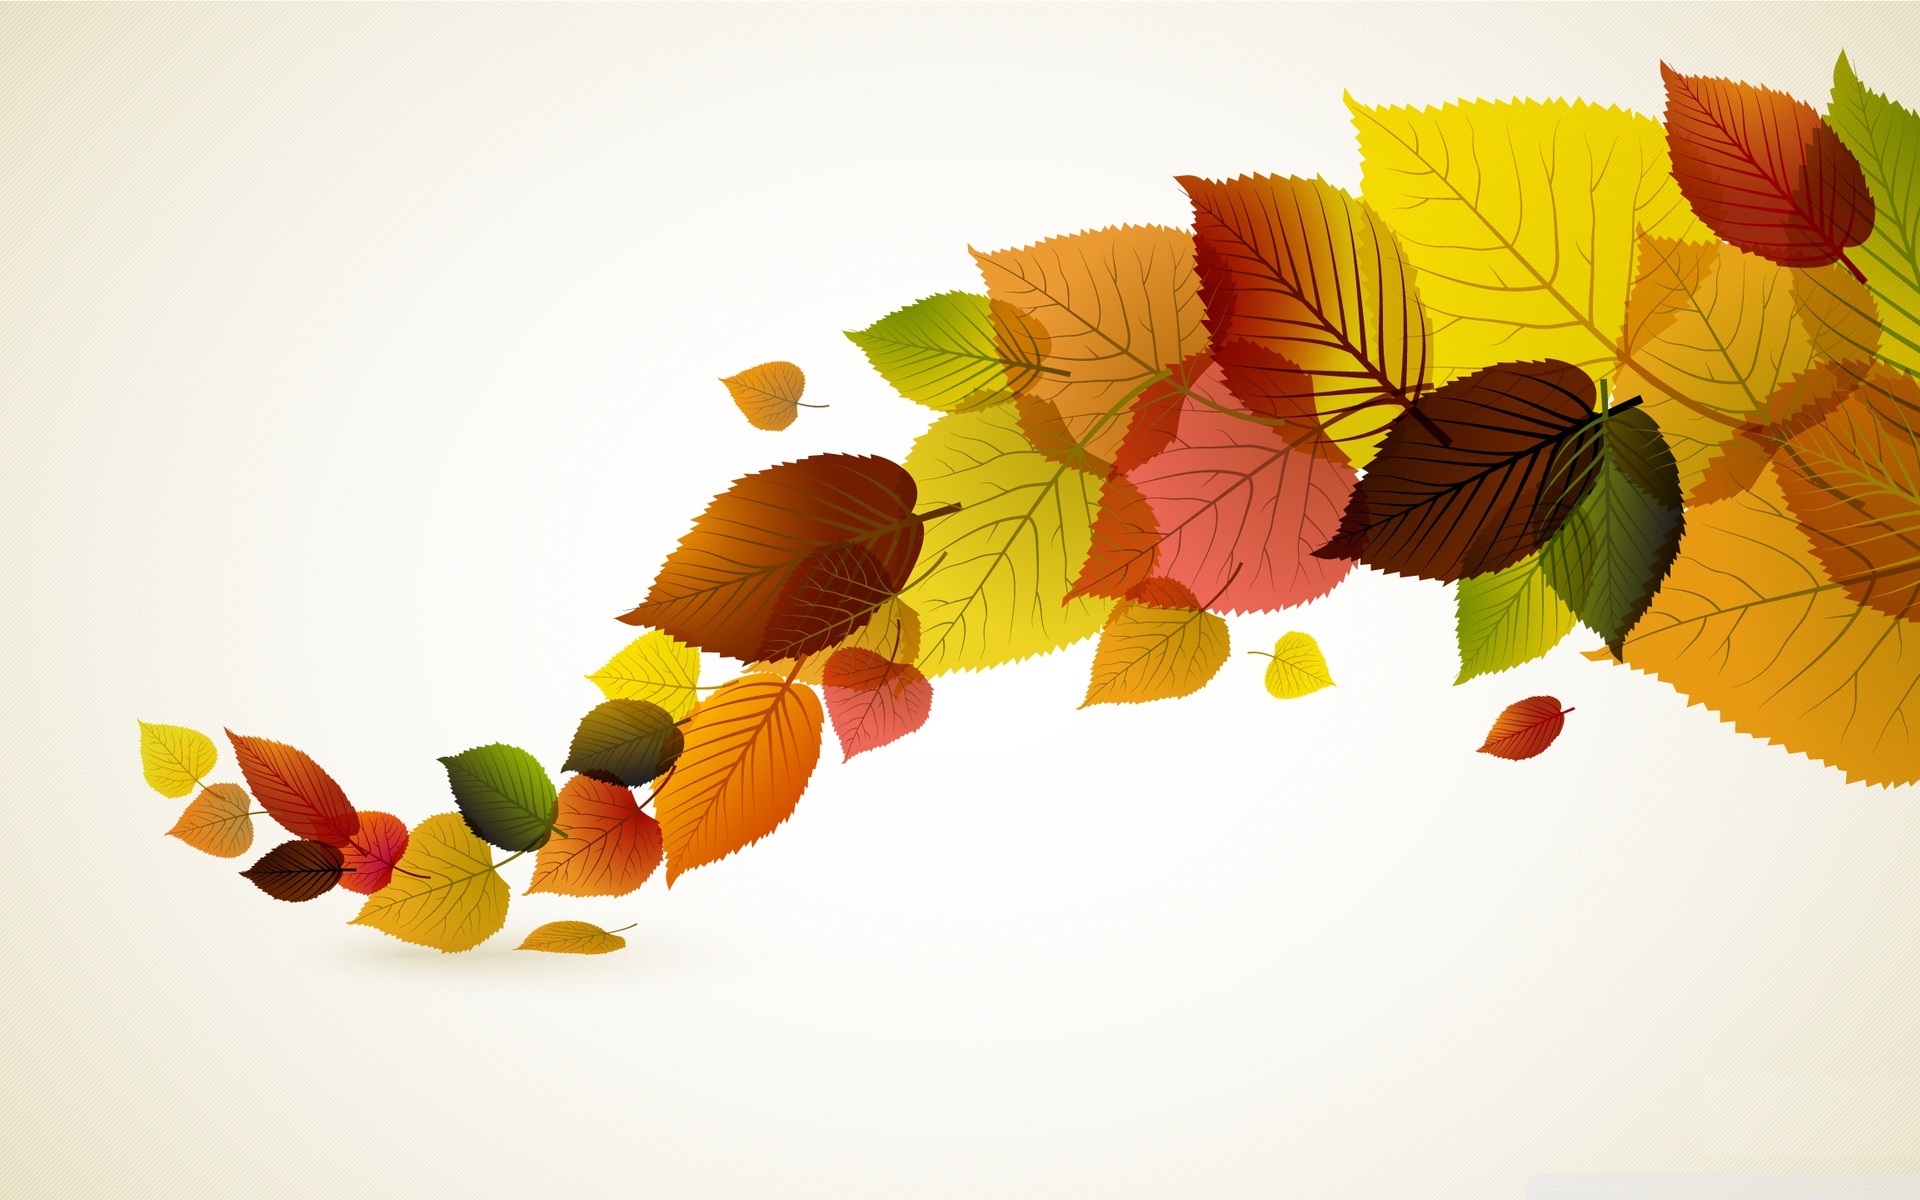 Autumn Leaves Fabric, Wallpaper and Home Decor | Spoonflower